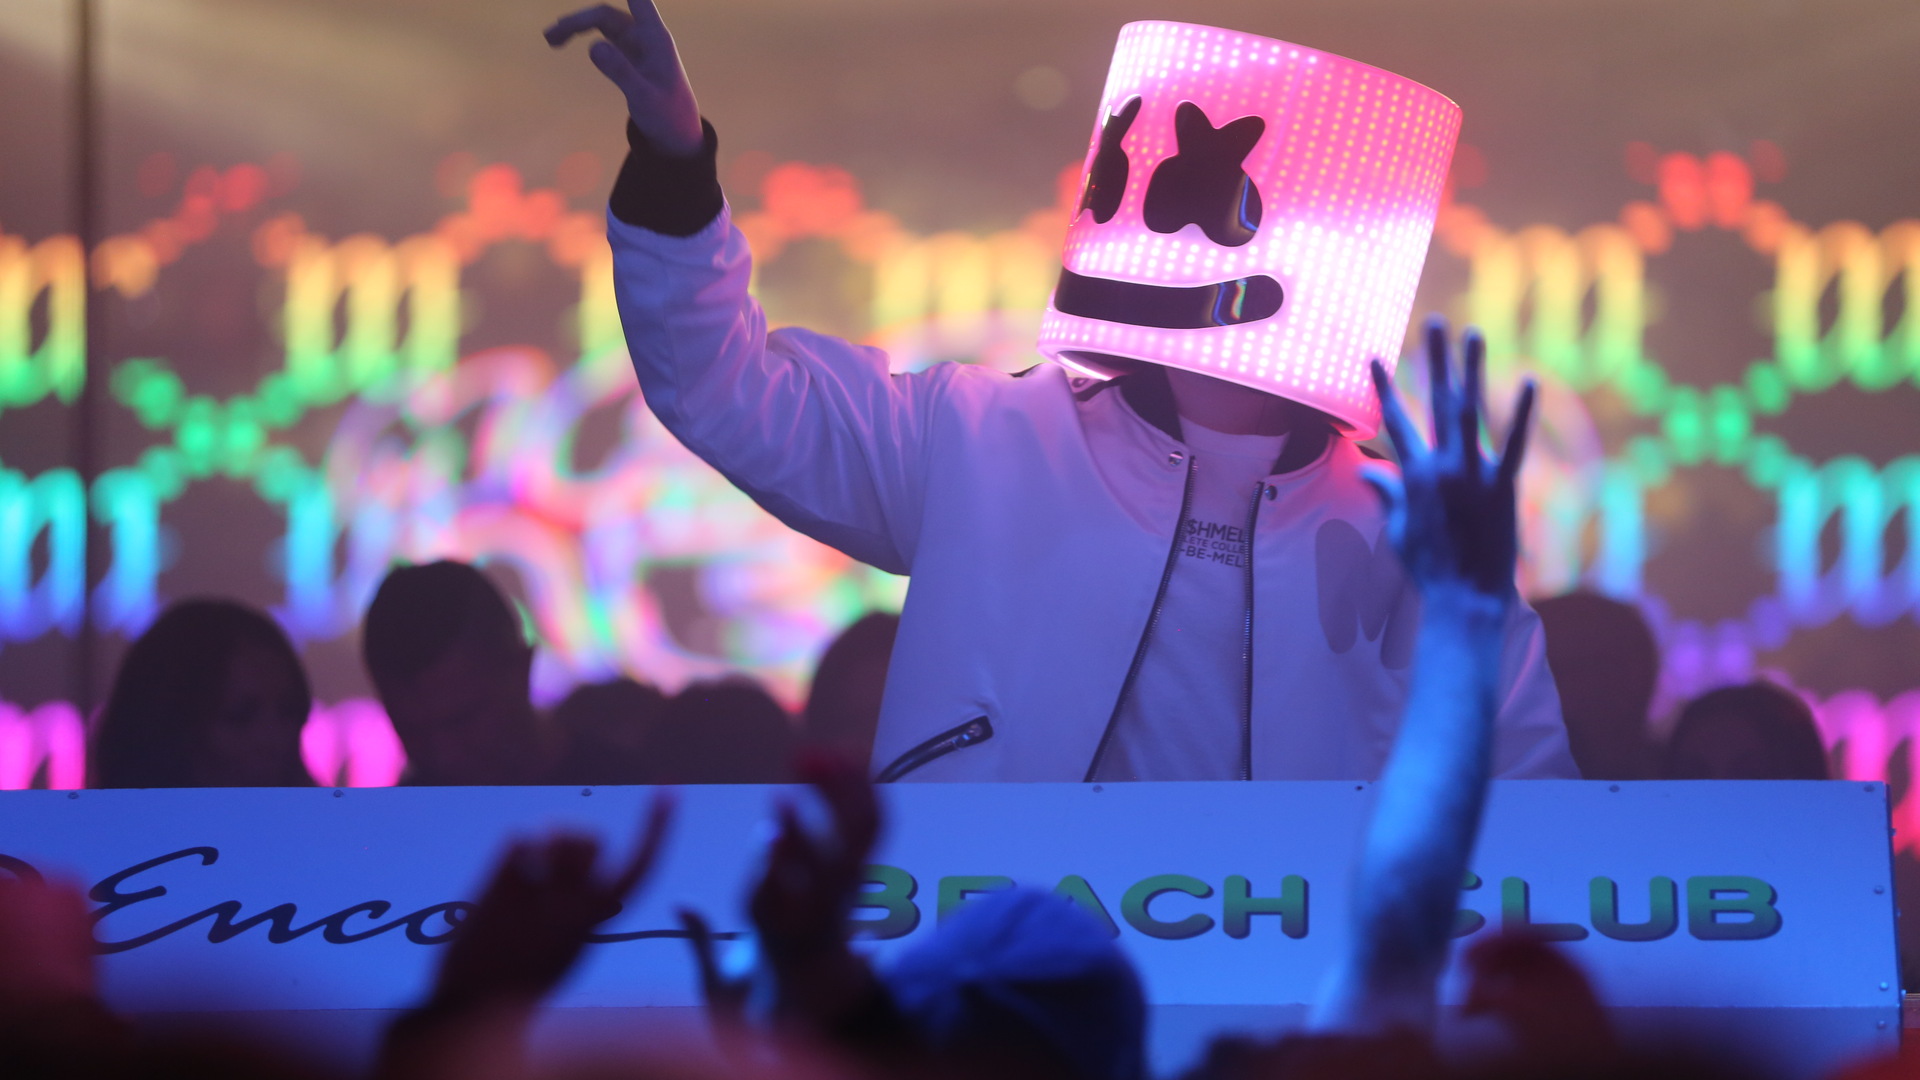 X marshmello famous dj laptop full hd p hd k wallpapers images backgrounds photos and pictures